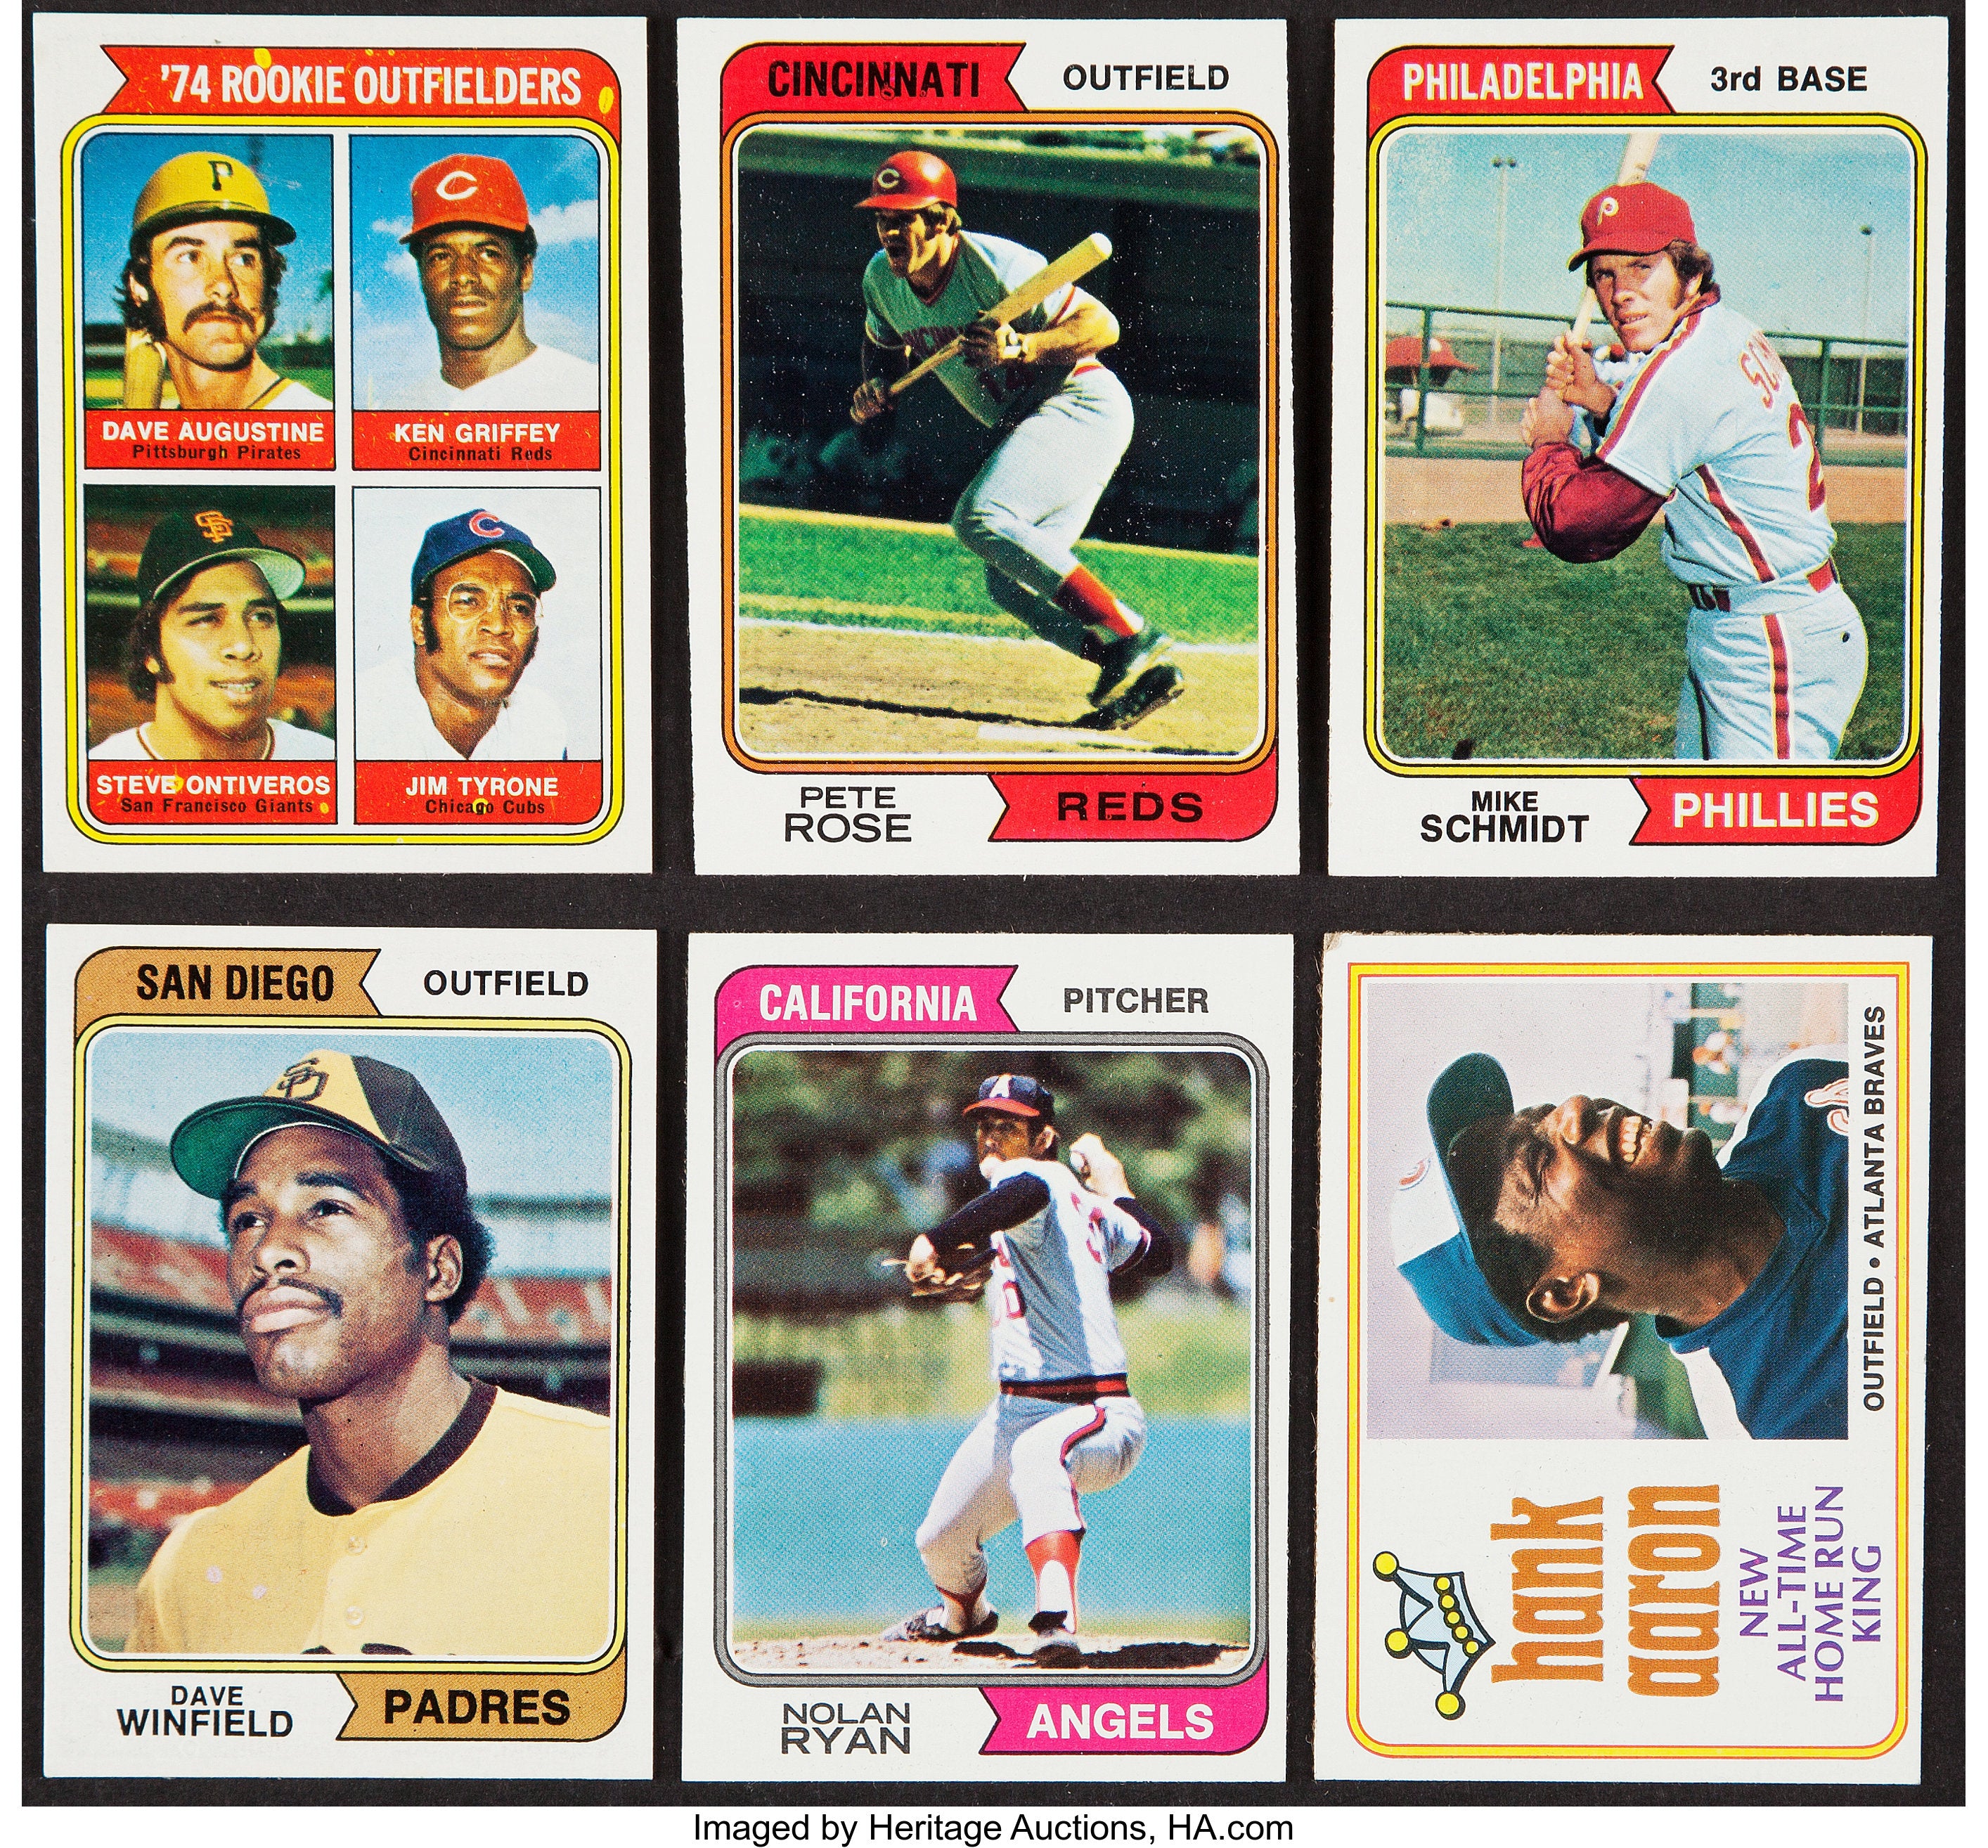 Sold at Auction: 25 Different 1974 Topps Baseball Cards w/ Dusty